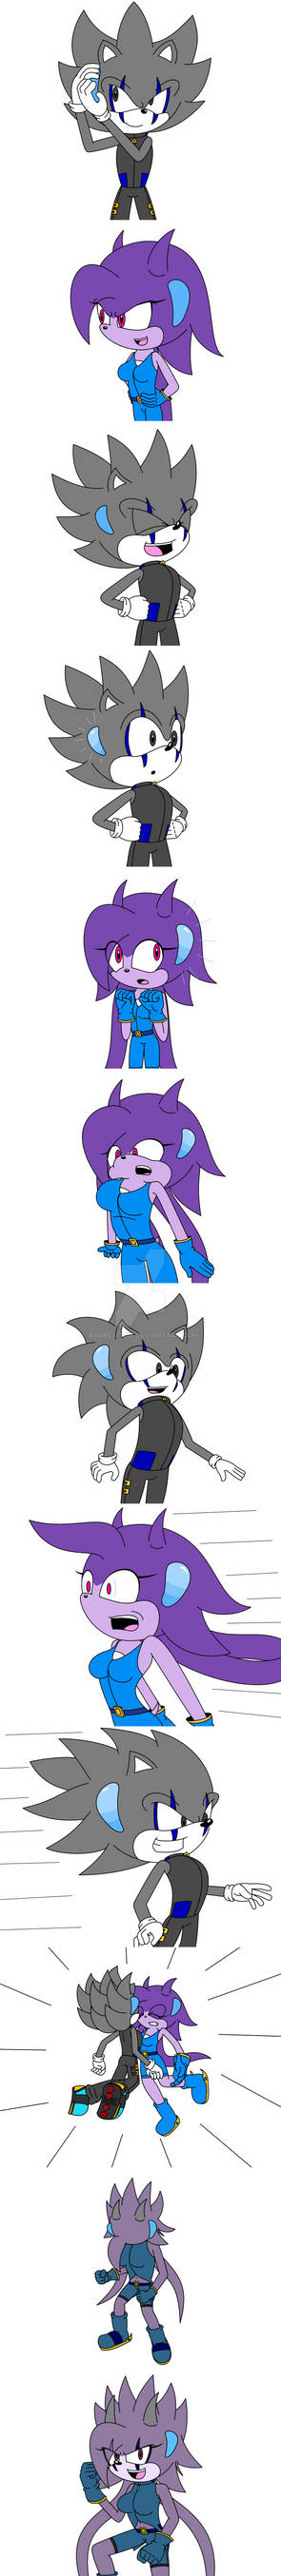 The rare fusion of Slain and Lilac Part 2